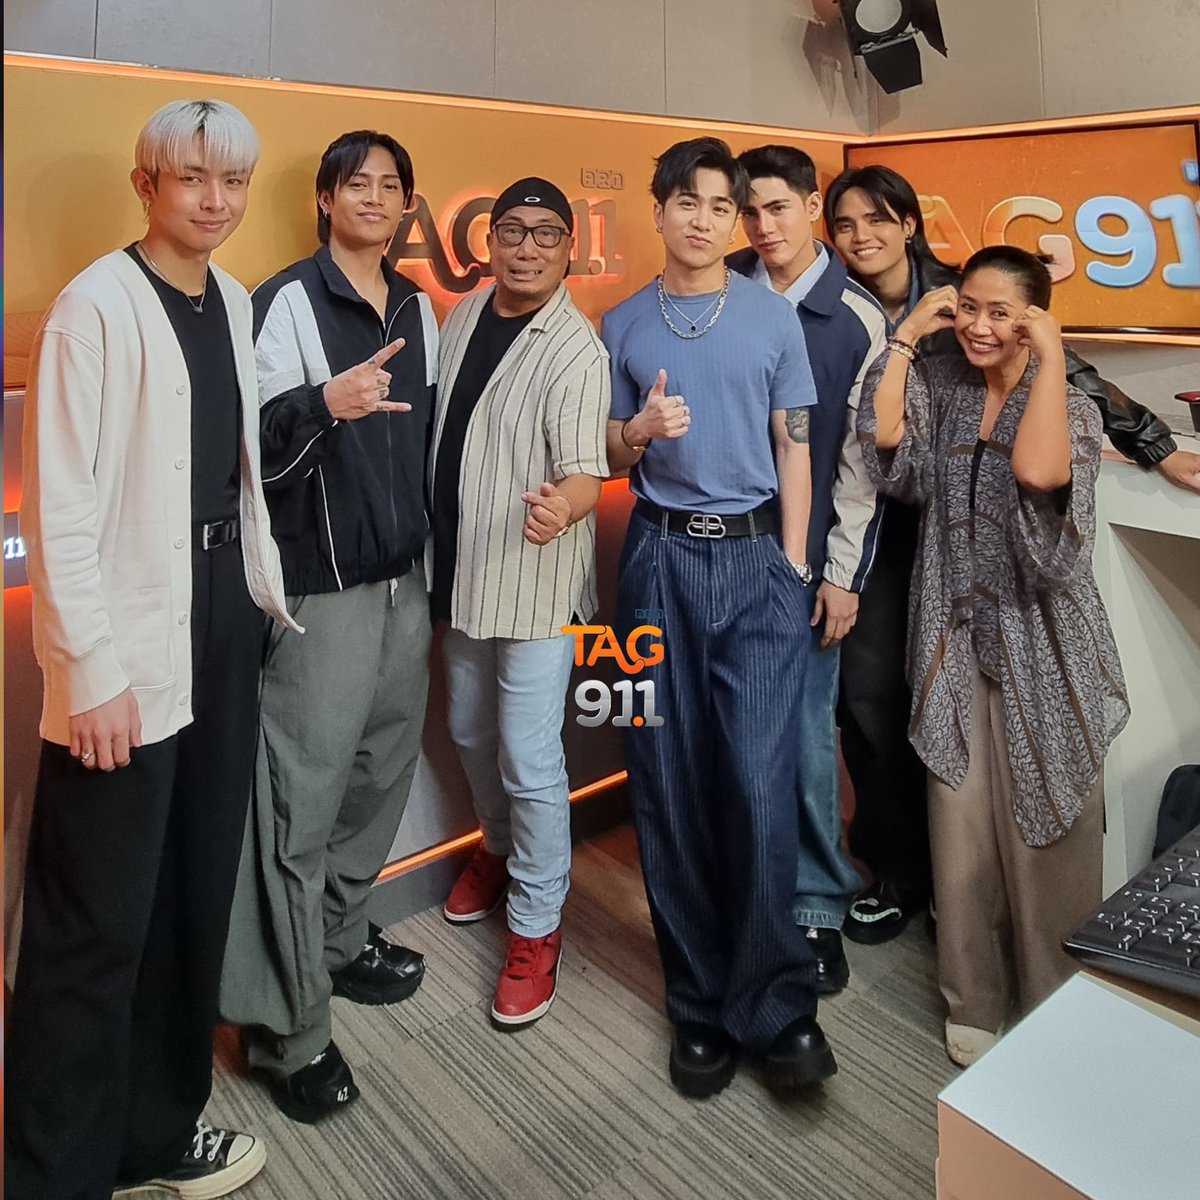 ⚠️LOOK: THE KINGS OF P-POP HAVE ARRIVED!⚠️ Catch @SB19Official members in an EXCLUSIVE STUDIO INTERVIEW this morning on #TagGisingNa! Full video will be uploaded on Tag 91.1 social media pages within the day. Stay tuned! #SB19PAGTATAGsaTAG Listen live: tag911.ae